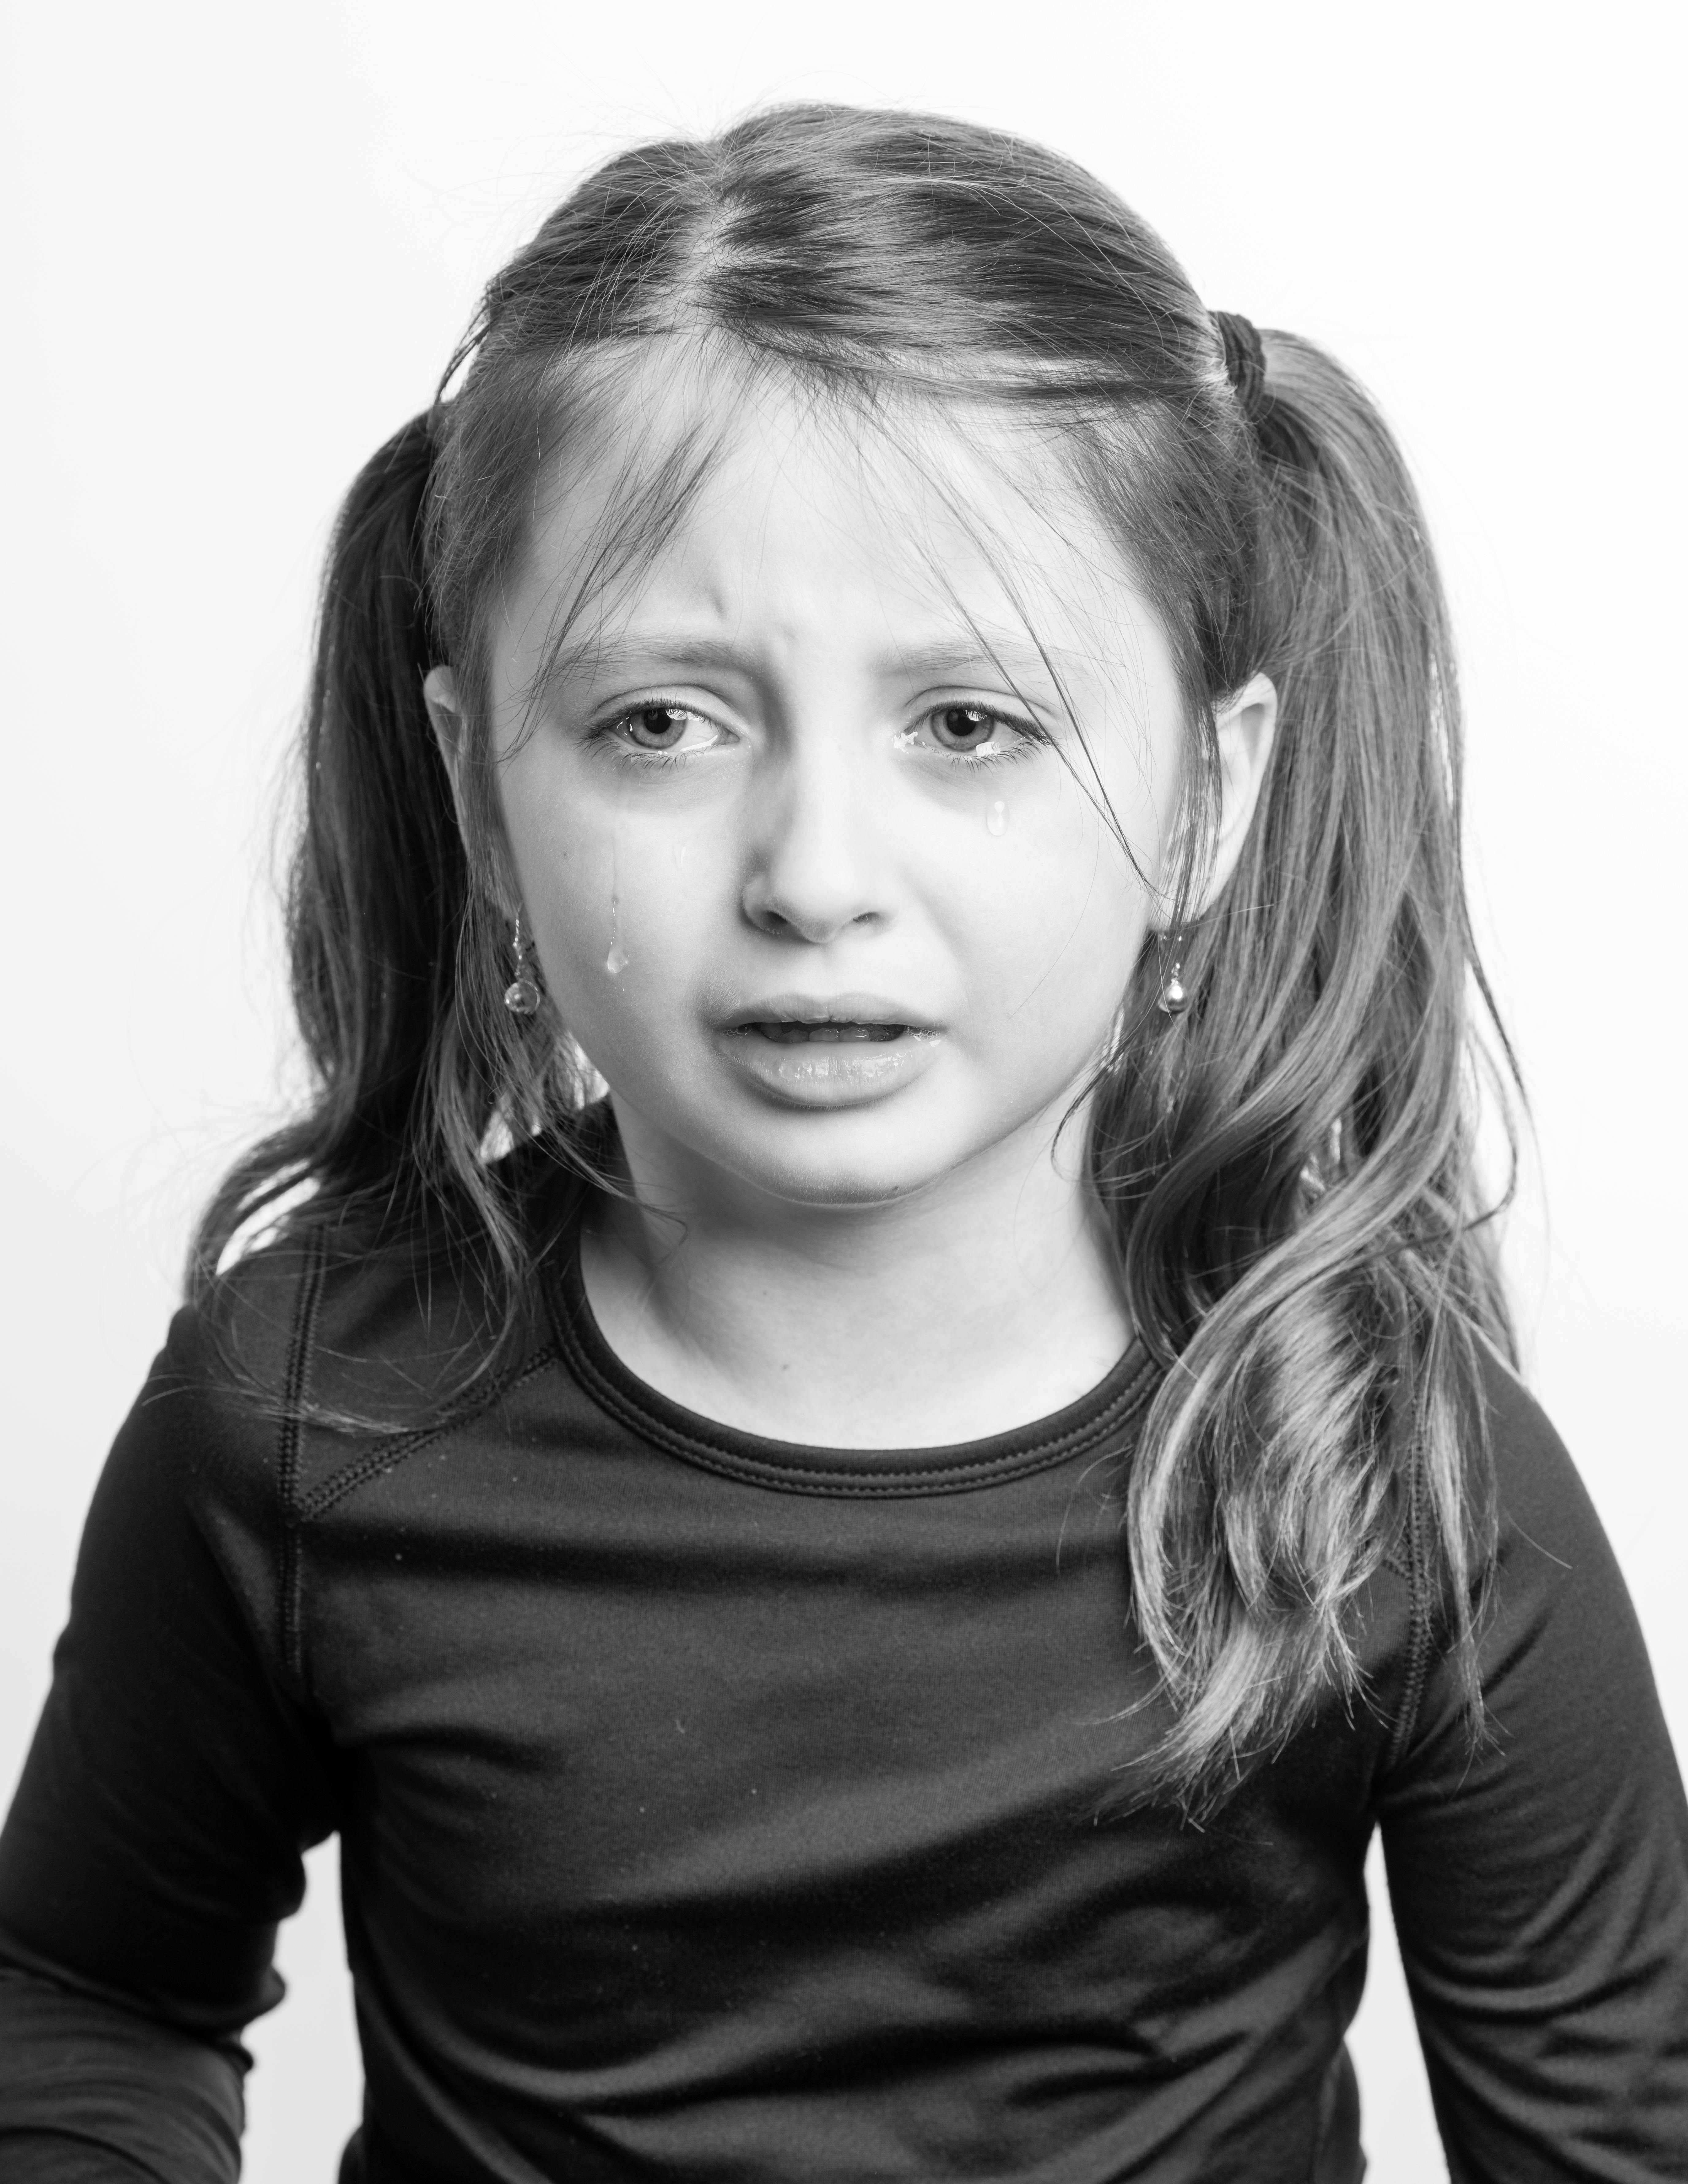 A little girl crying | Source: Pexels